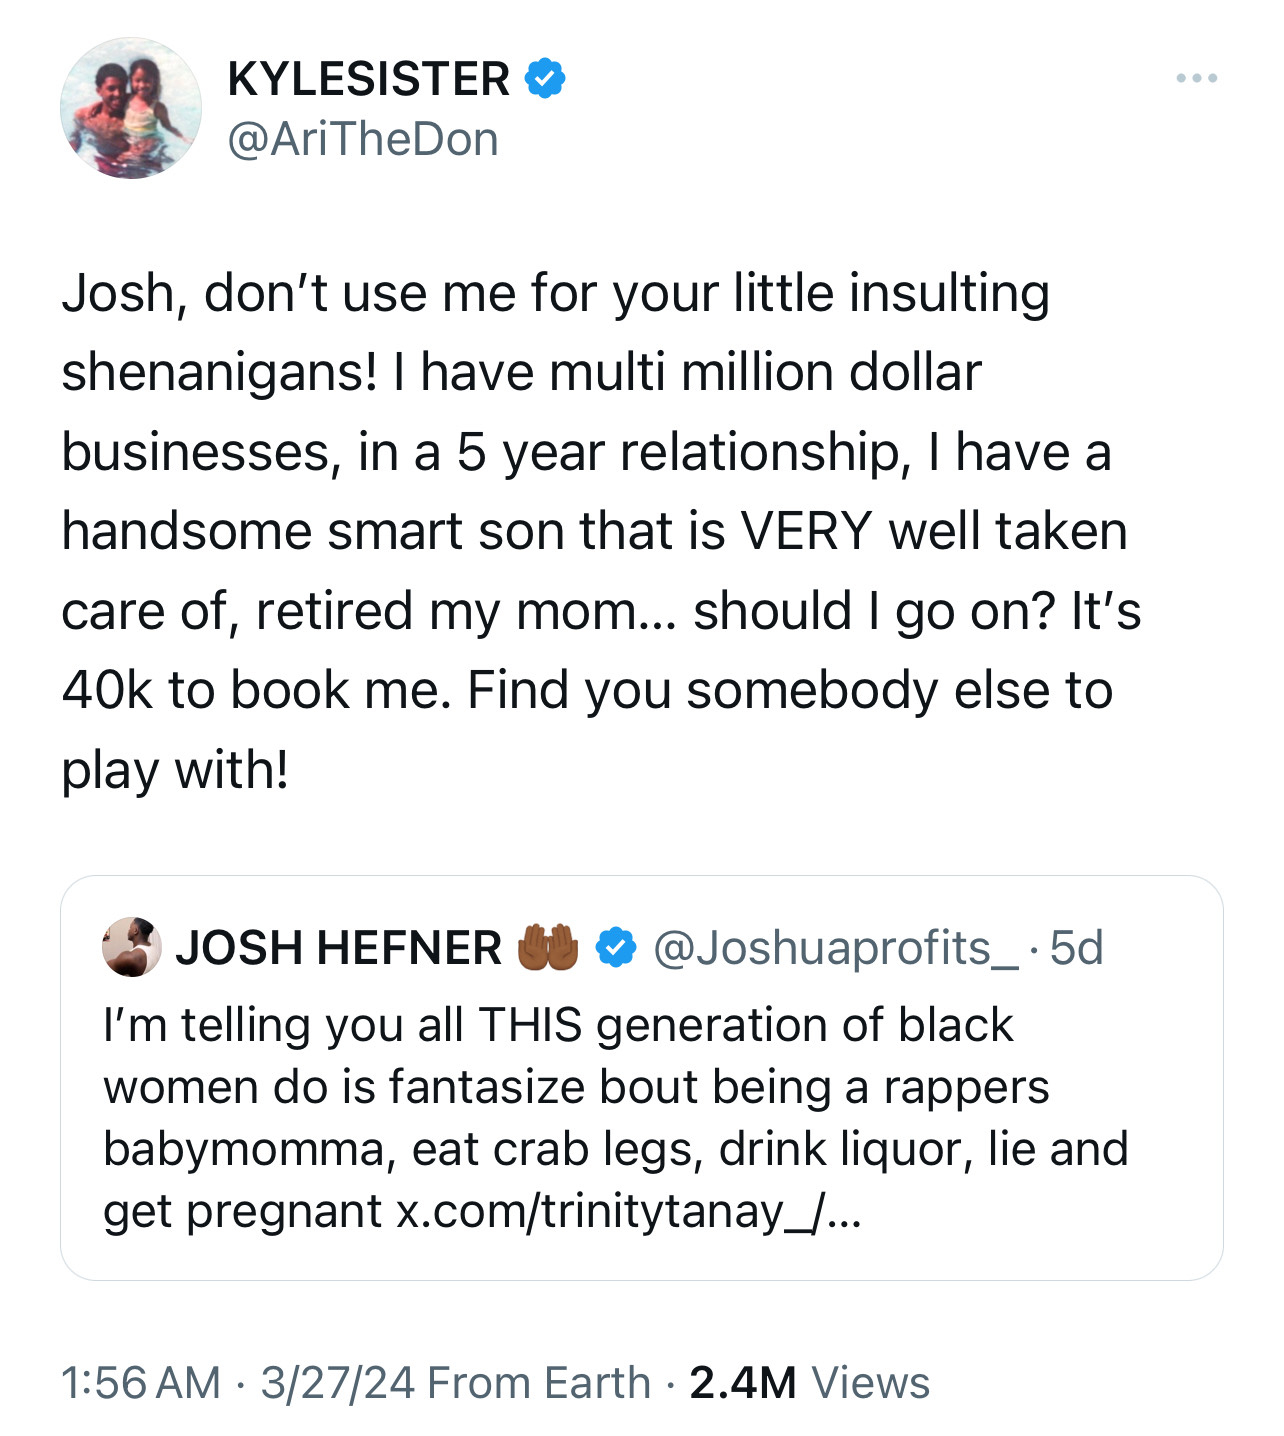 Tweet exchange about not using Joshua&#x27;s marketing strategy, with one party planning to retire their mom and criticizing the approach